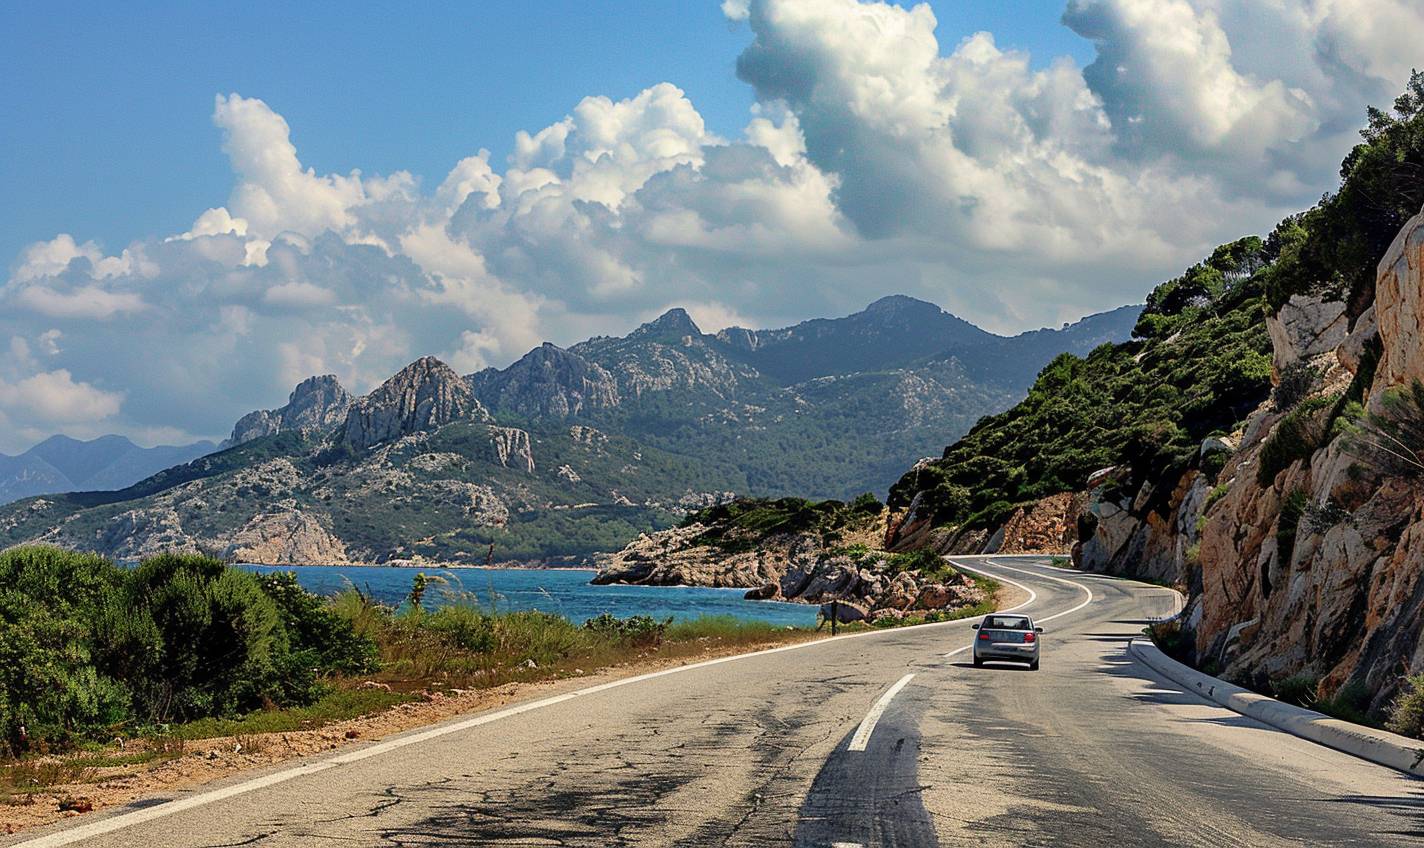 Generate a realistic image depicting a car traveling on a road along the coasts of Sardinia. The image should represent a sunny day with crystal clear water. The image of the car should be clearly visible. Thank you!